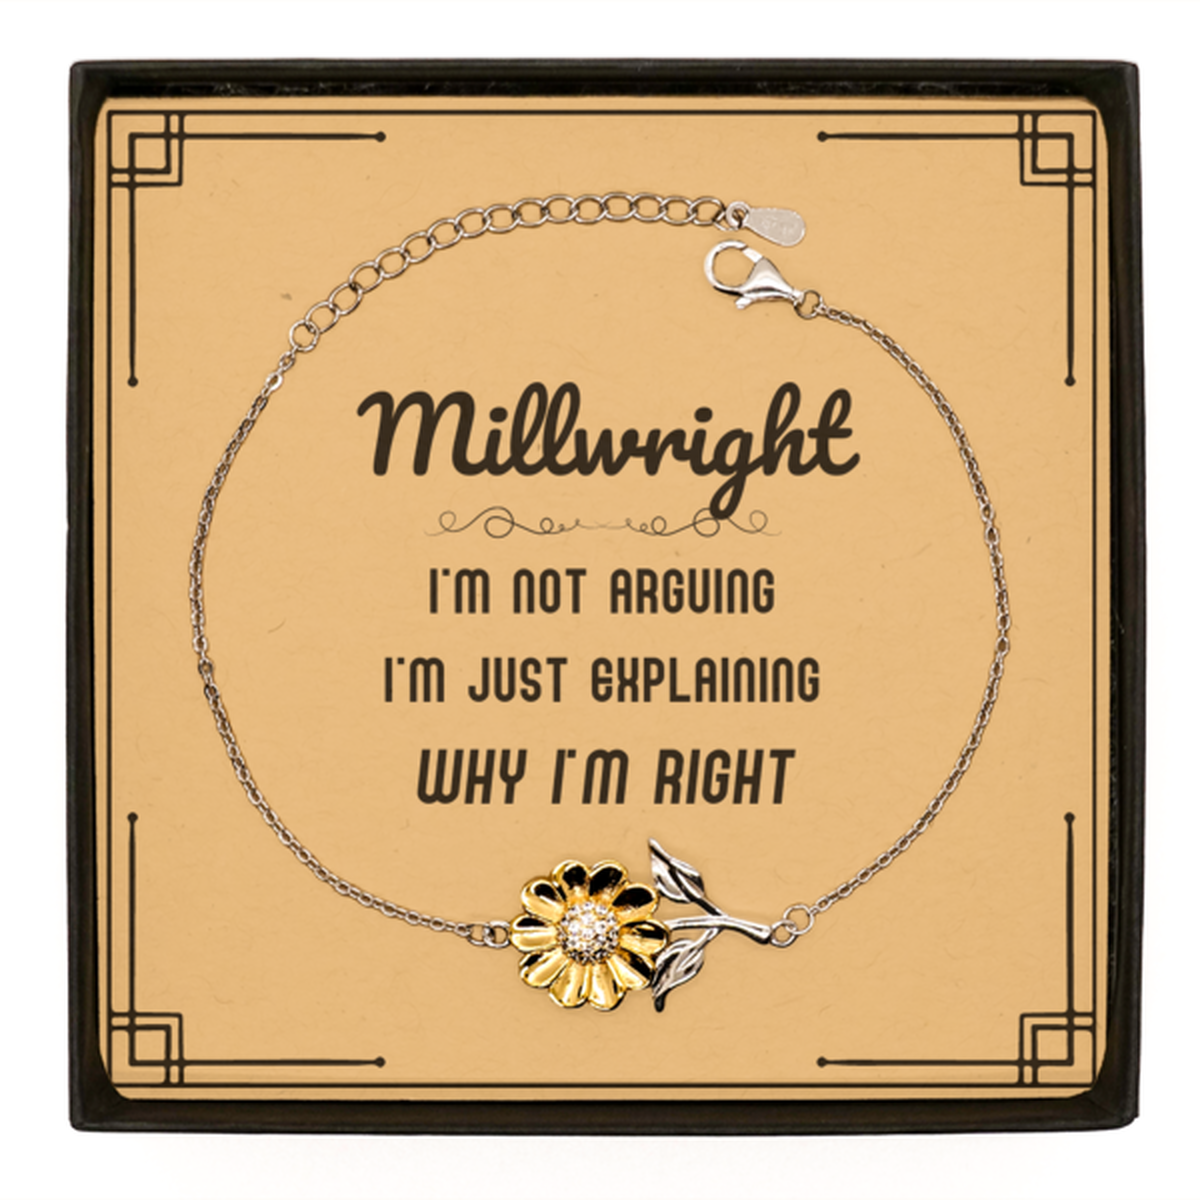 Millwright I'm not Arguing. I'm Just Explaining Why I'm RIGHT Sunflower Bracelet, Funny Saying Quote Millwright Gifts For Millwright Message Card Graduation Birthday Christmas Gifts for Men Women Coworker